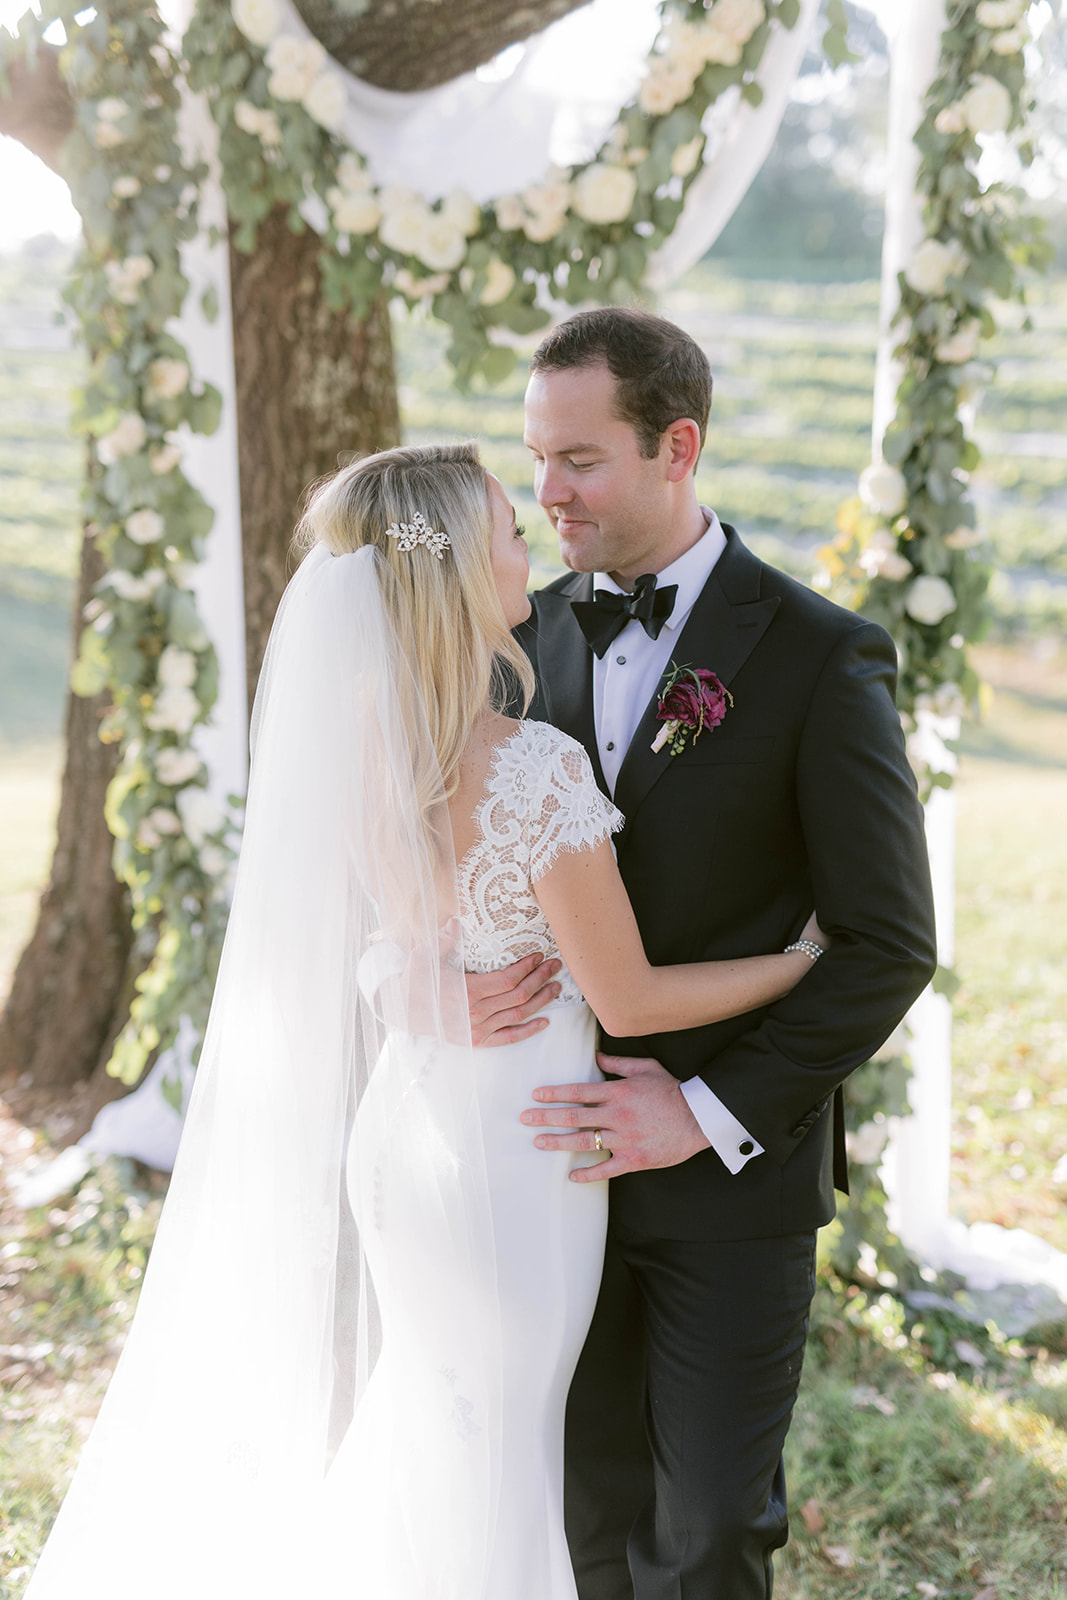 Bride and groom embrace during their portrait session at the Montaluce Winery wedding